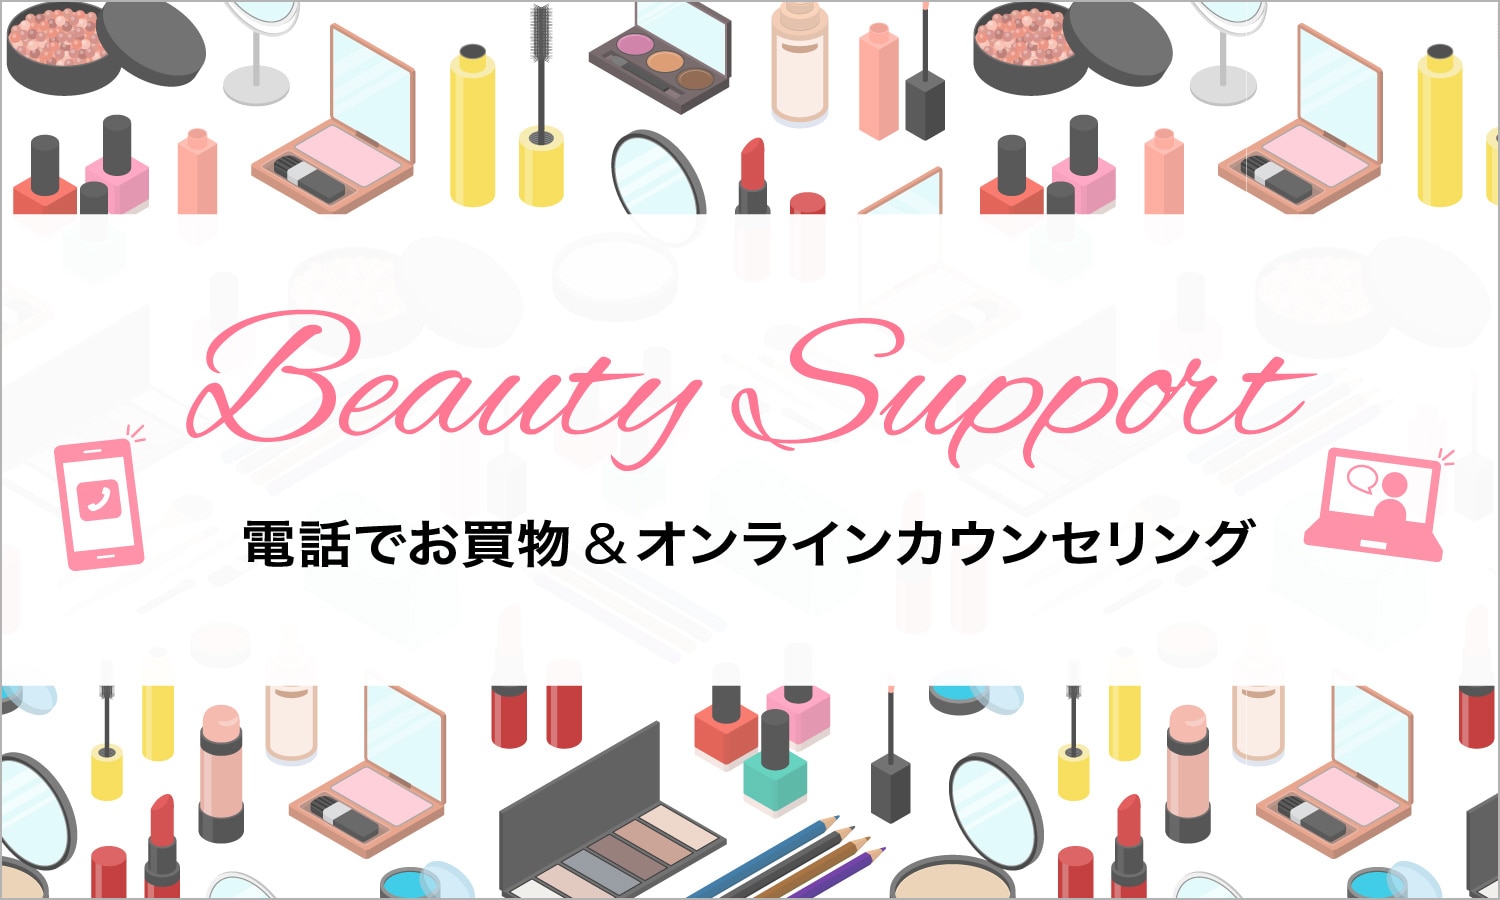 Beauty Support